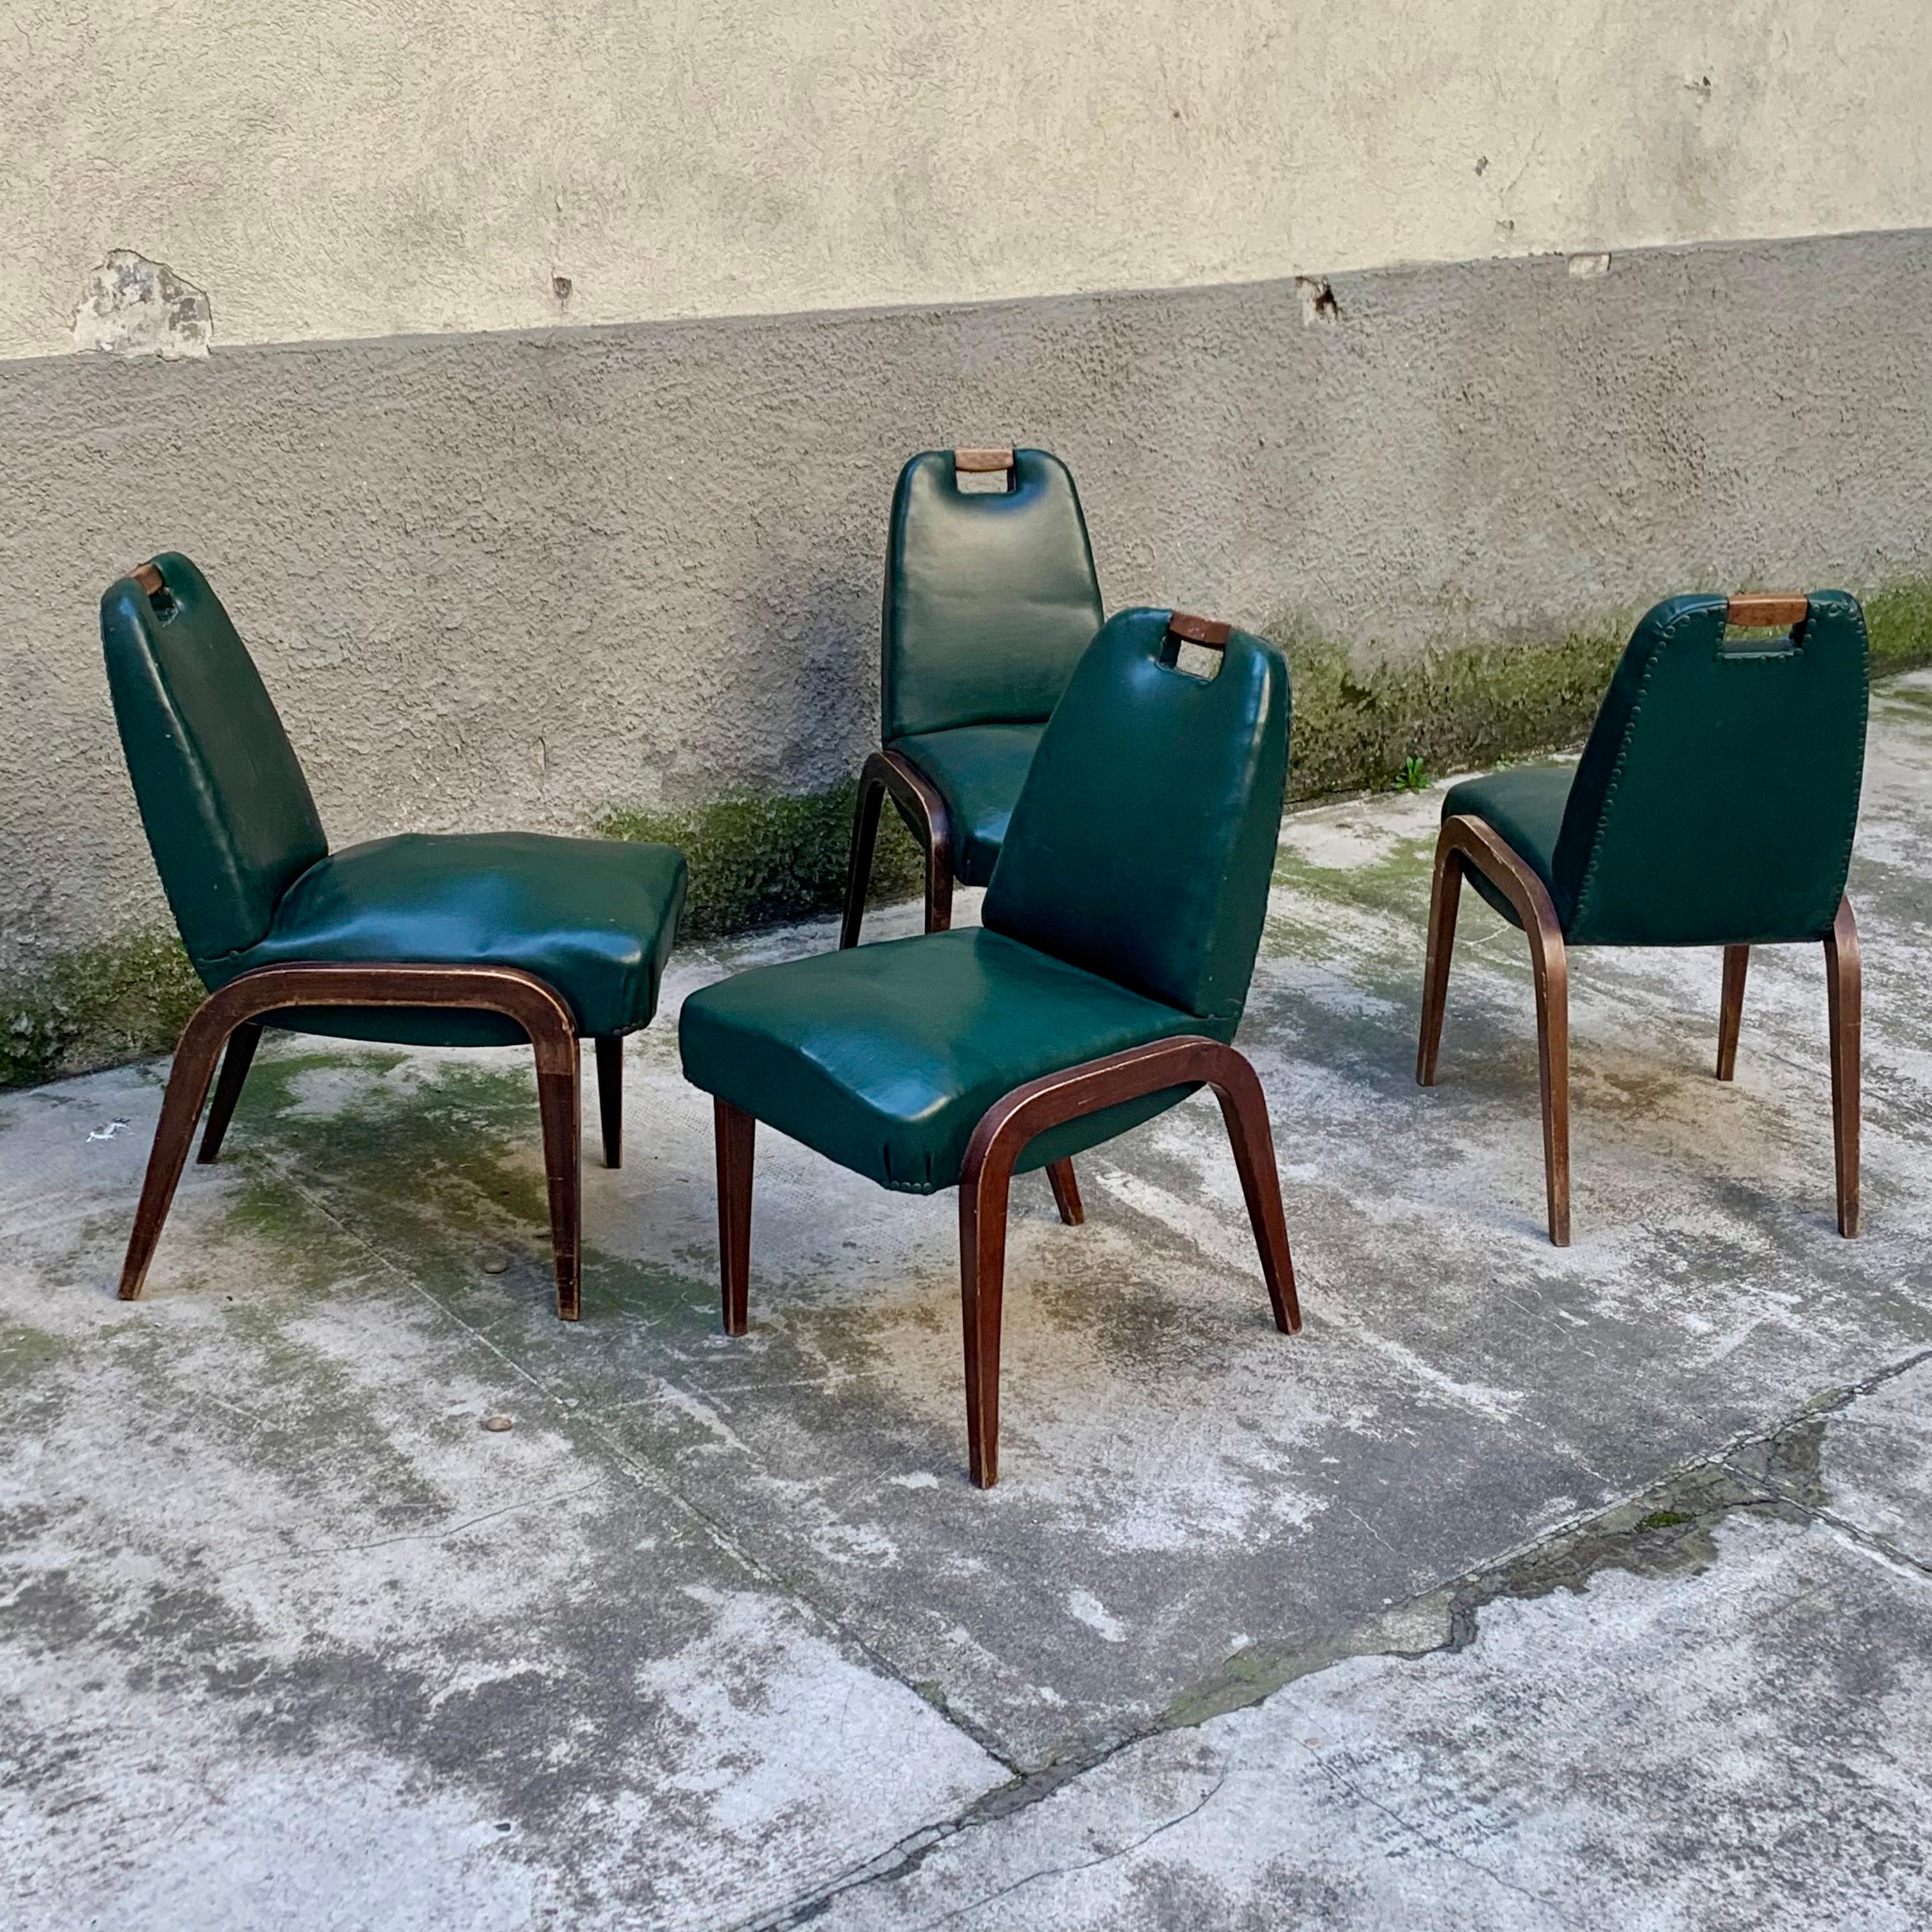 Art Deco Set of 4 Wood and Leatherette Chairs - Italy - 1930s For Sale